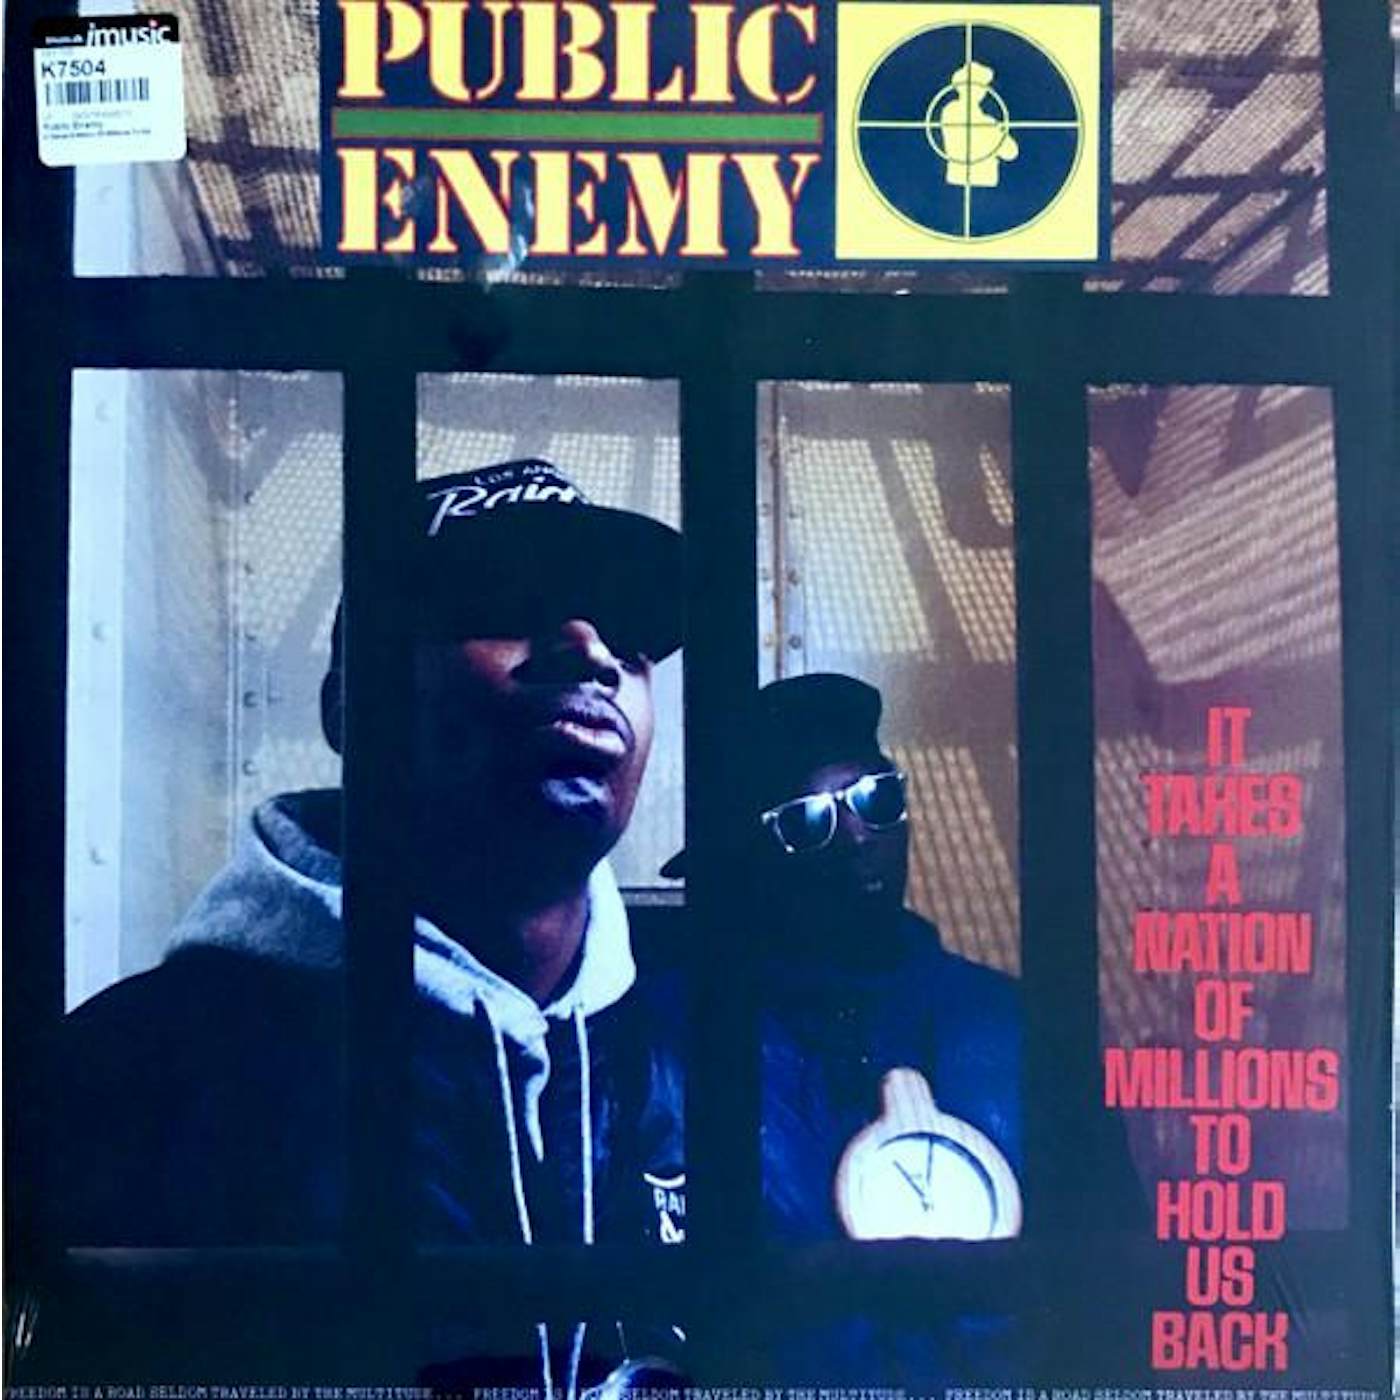 Public Enemy IT TAKES A NATION OF MILLIONS TO HOLD US BACK (HQ VINYL) Vinyl Record